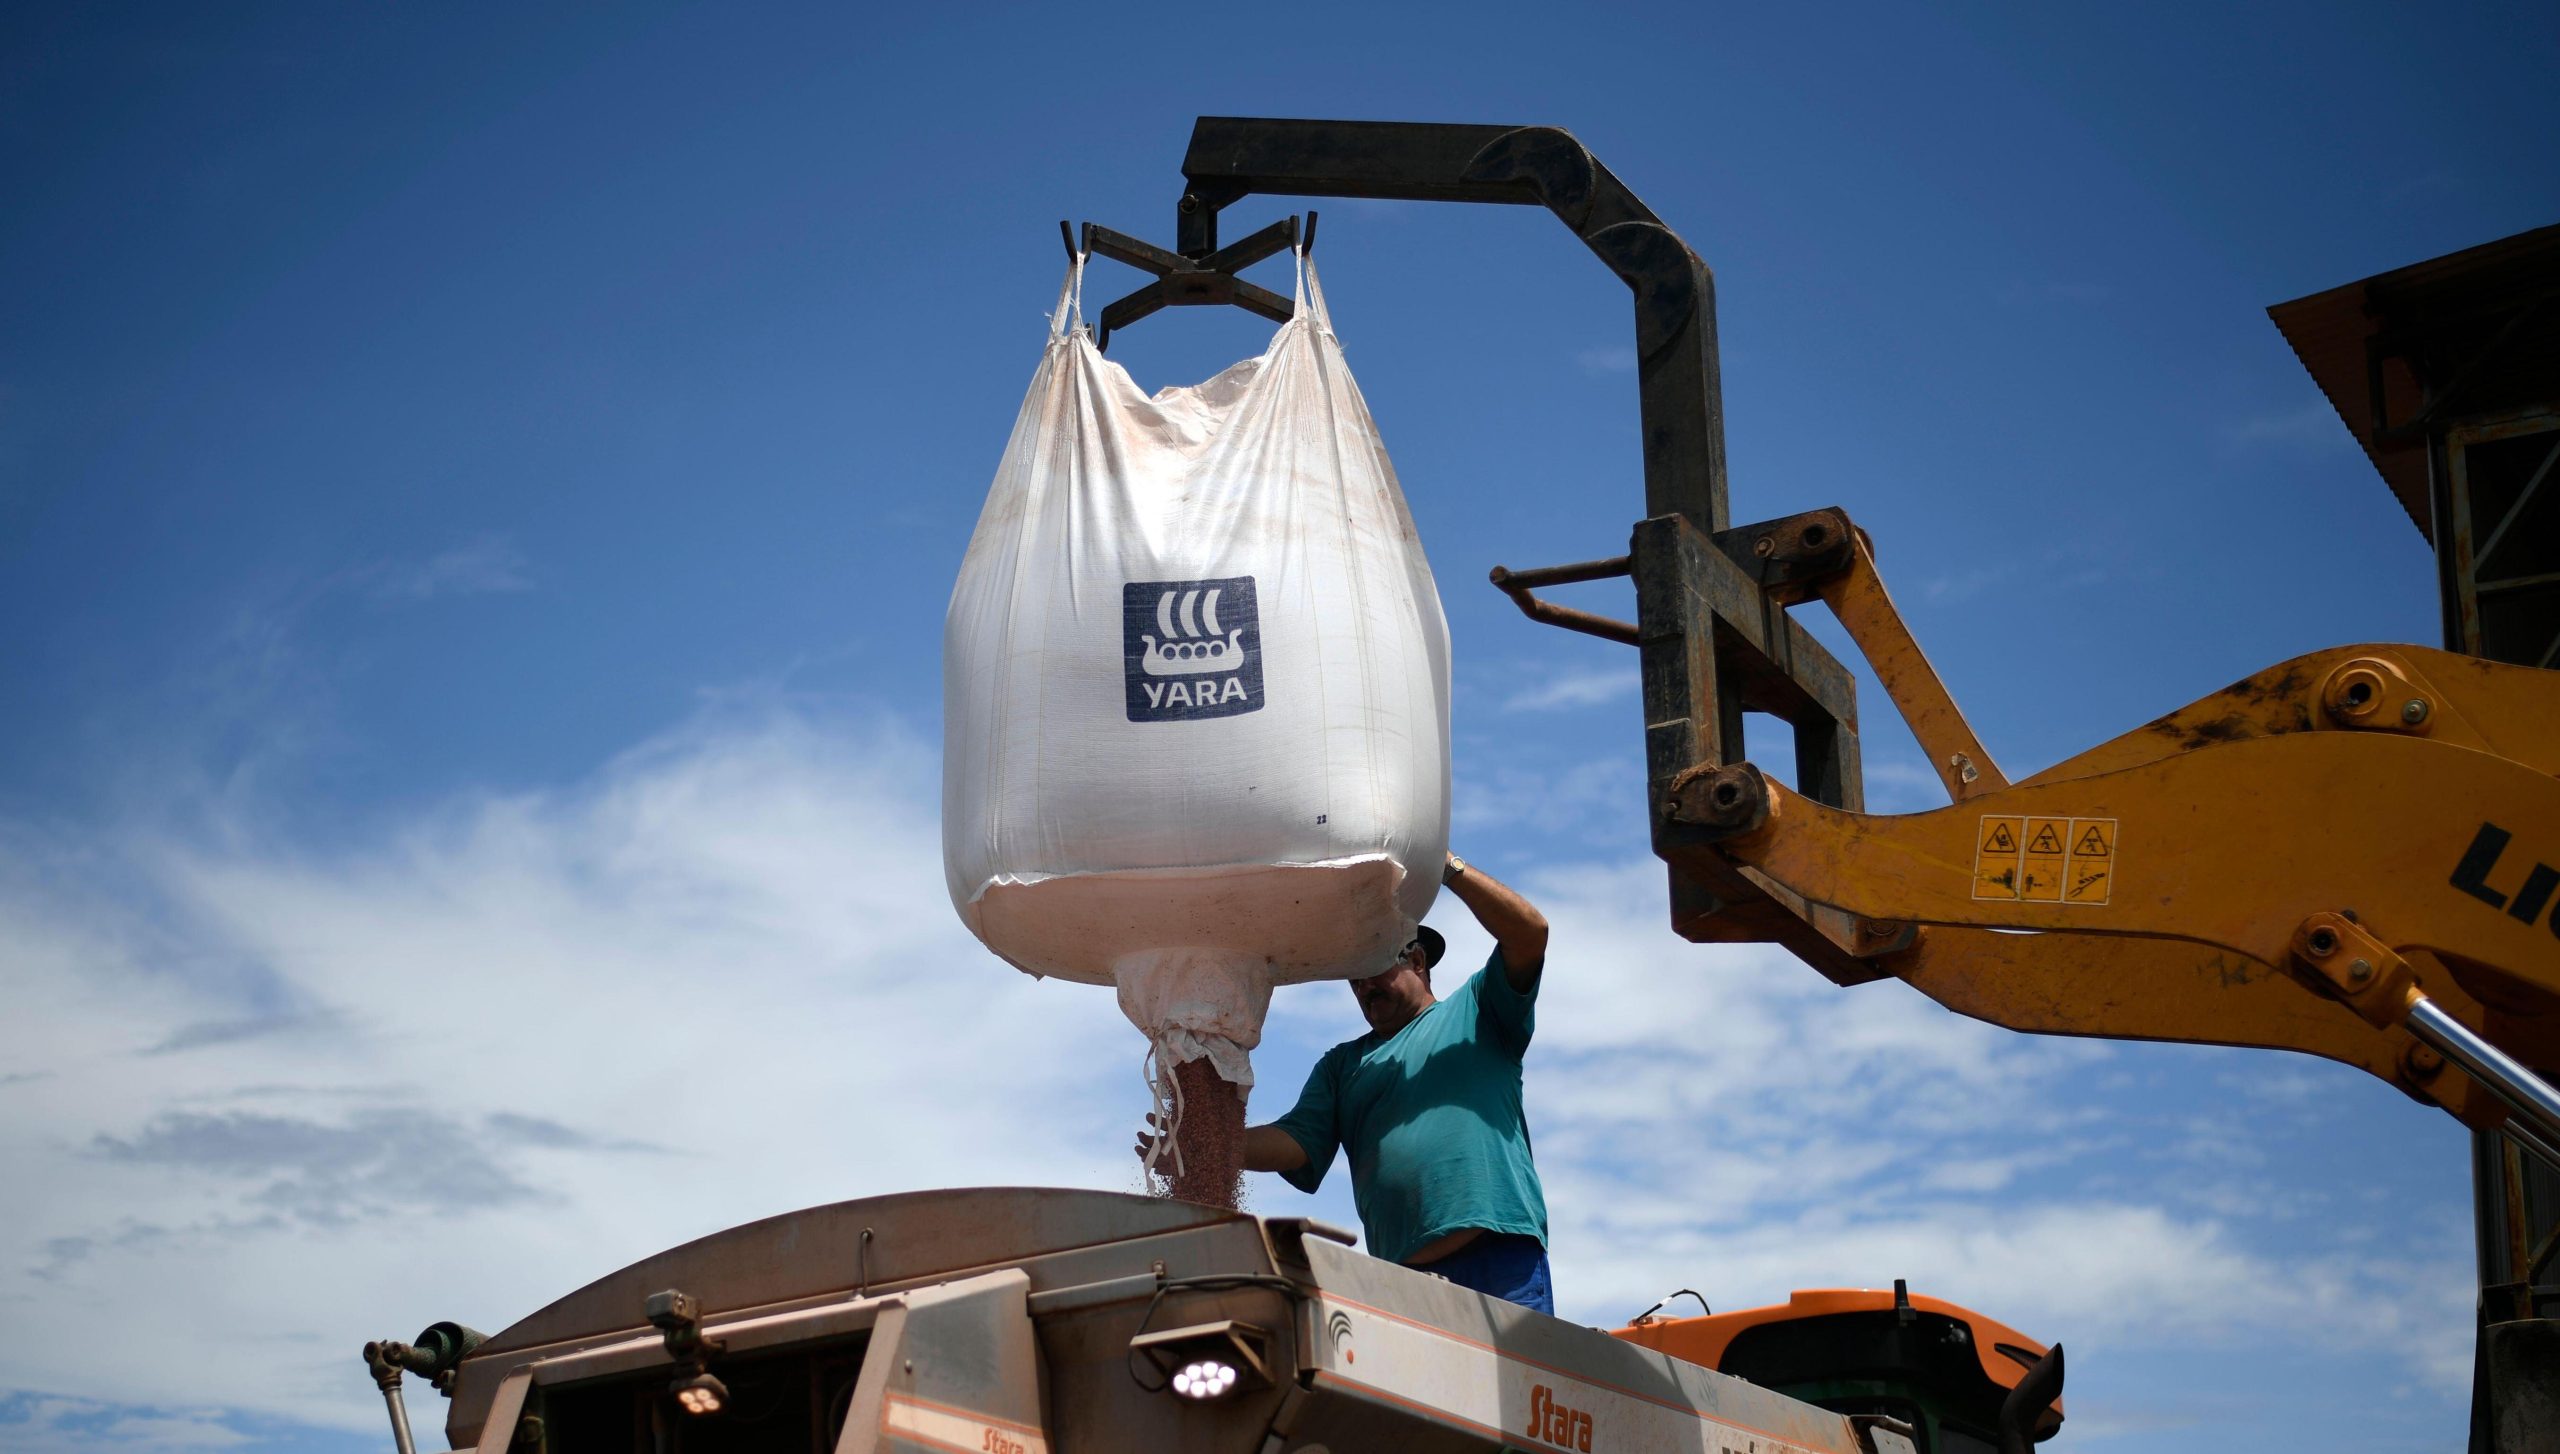 <p>A farm worker loads fertiliser onto a tractor in the state of Goias, Brazil. War in Ukraine has deepened the global fertiliser crisis that was already impacting farmers in Brazil, with some fearing this may hit productivity, harvests and prices. (Image: Mateus Bonomi / Sipa US / Alamy)</p>